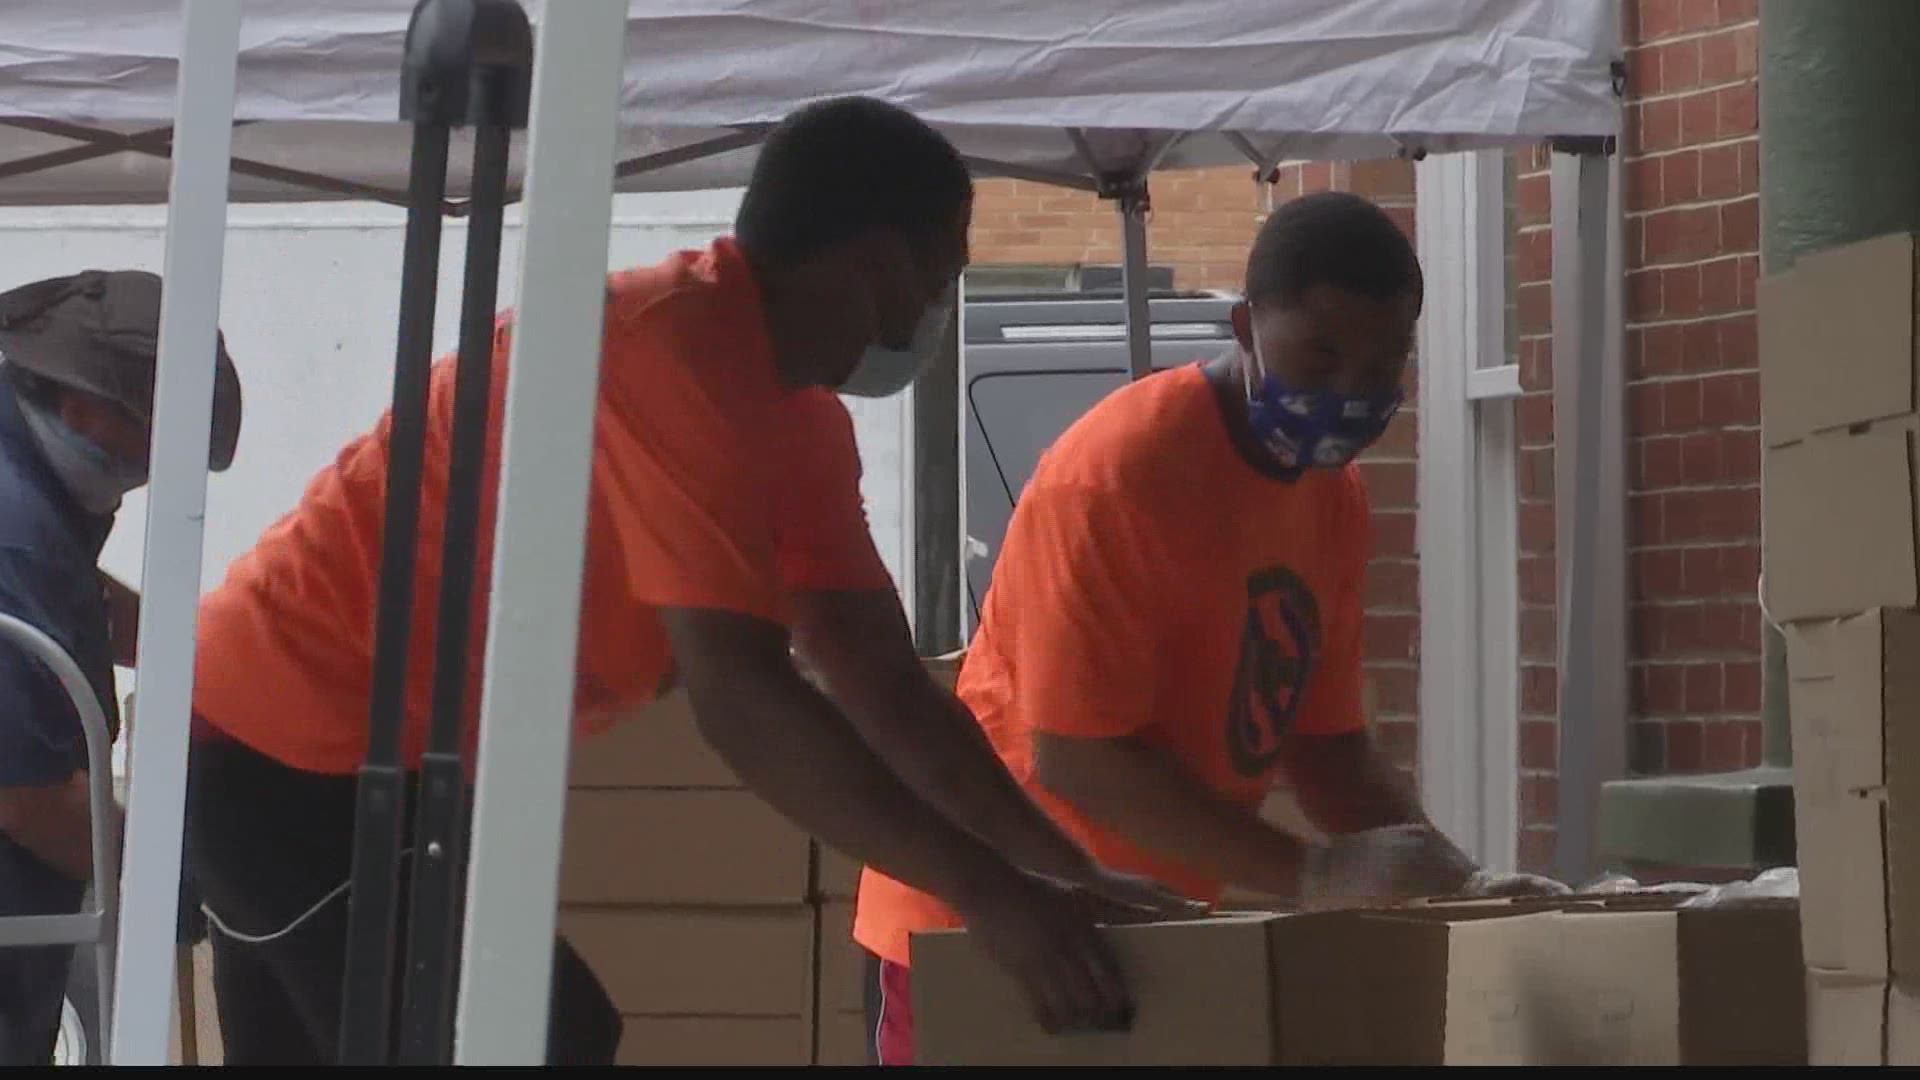 The Legacy Center is partnering with over thirty churches and three non-profits to distribute over 60,000 pounds of food each week to people in Huntsville.